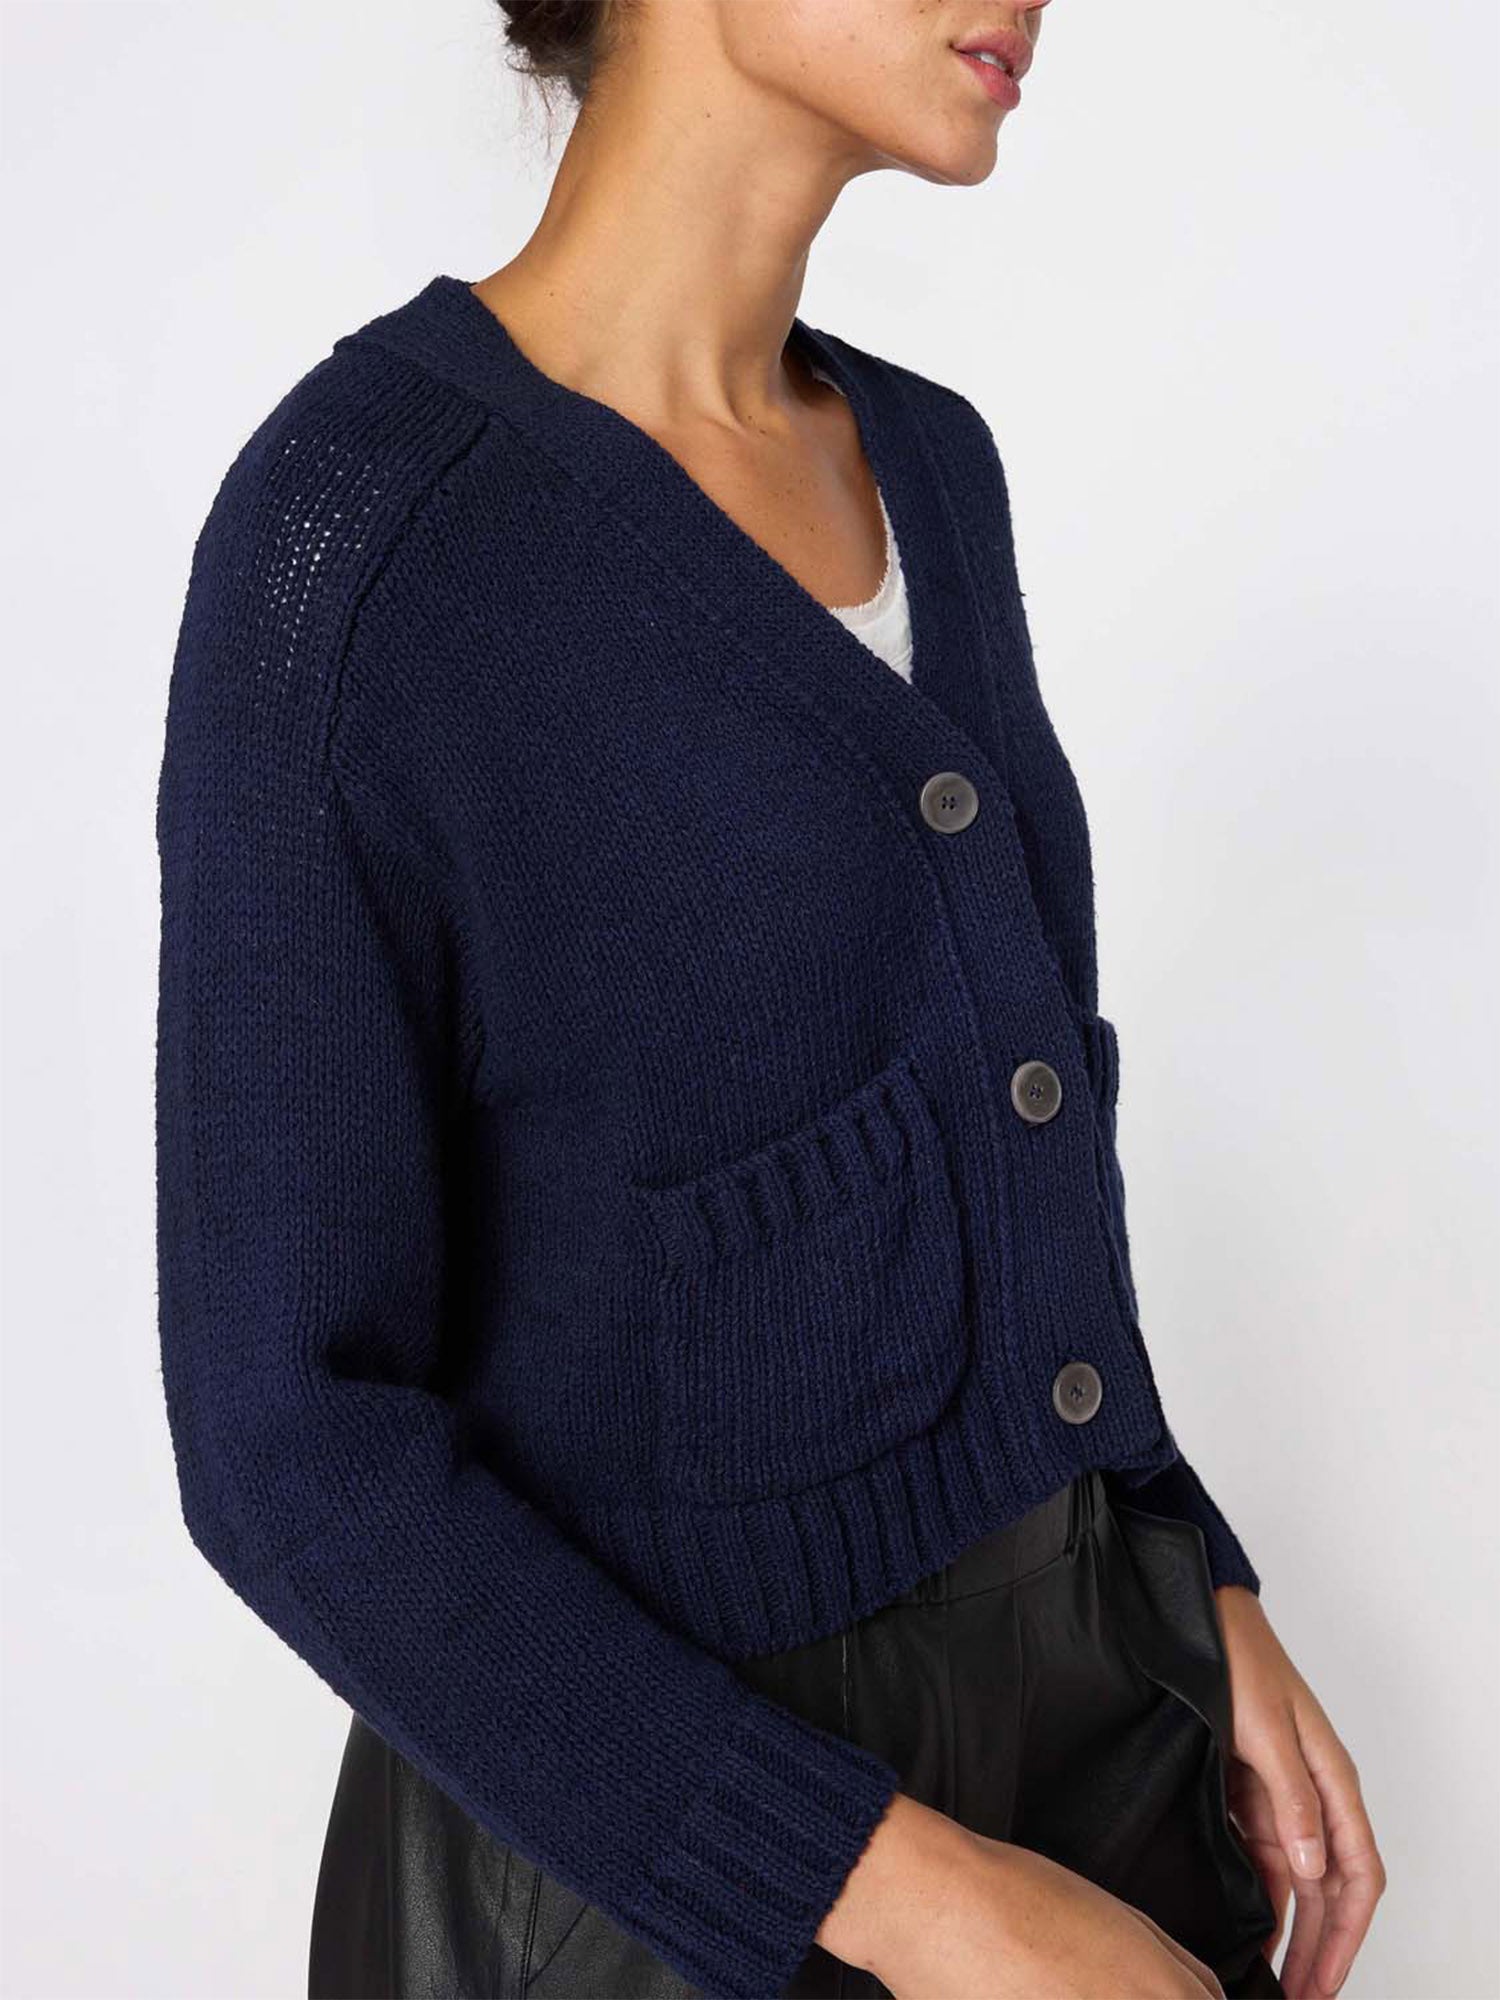 Cropped navy linen cotton cardigan sweater side view 2